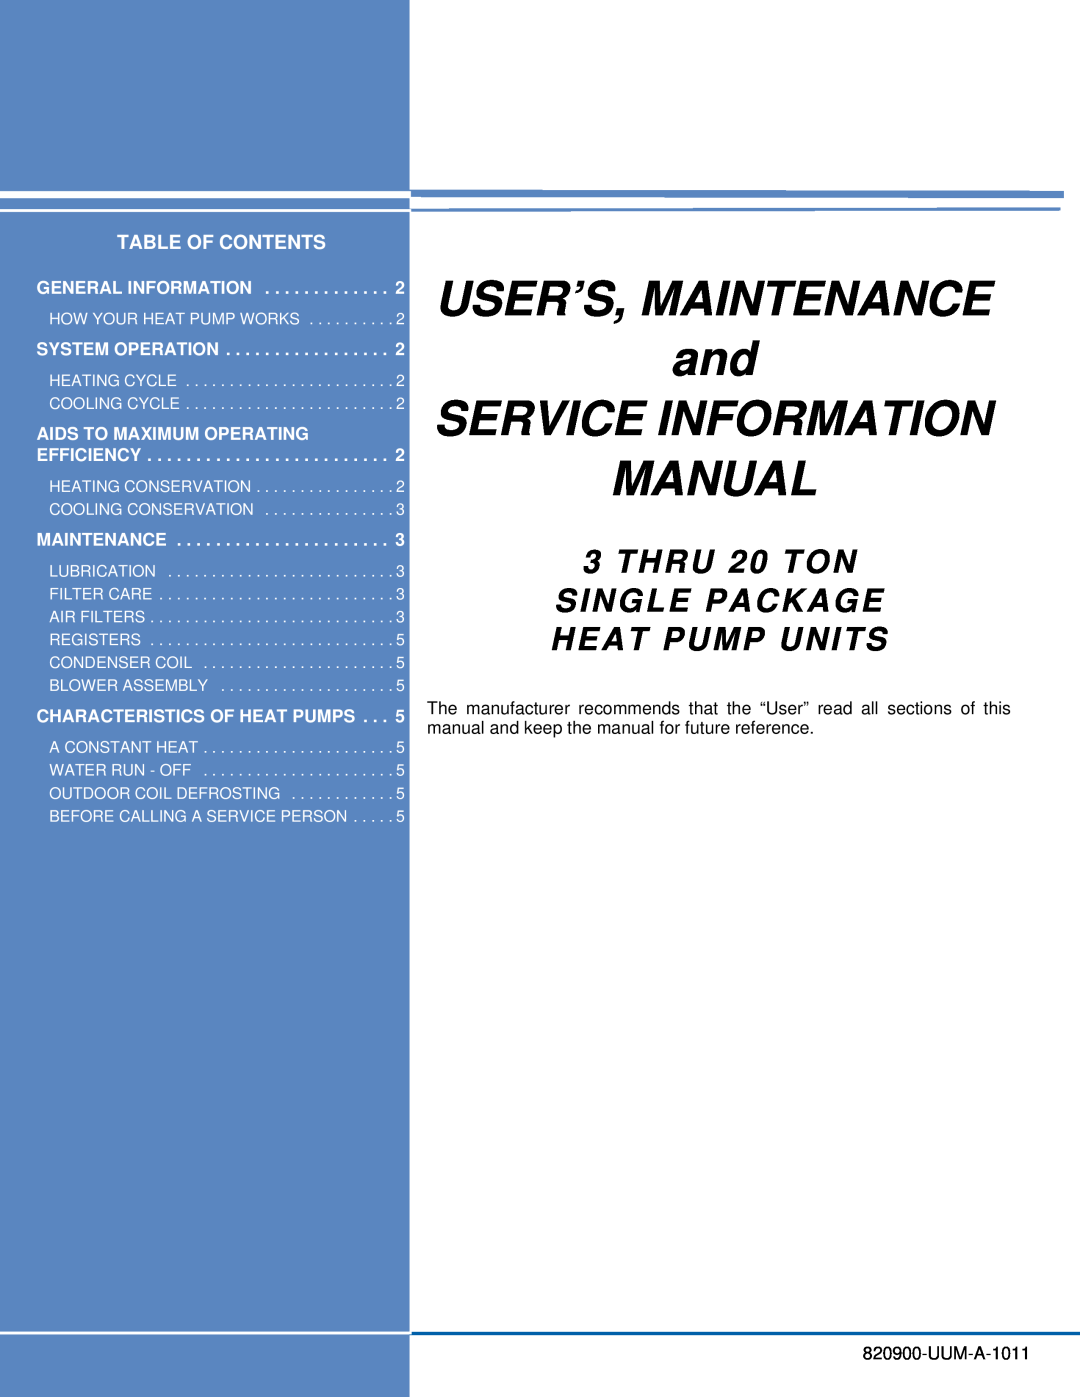 Johnson Controls 820900-UUM-A-1011 manual USER’S, MAINTENANCE and SERVICE INFORMATION, Manual, Table Of Contents 